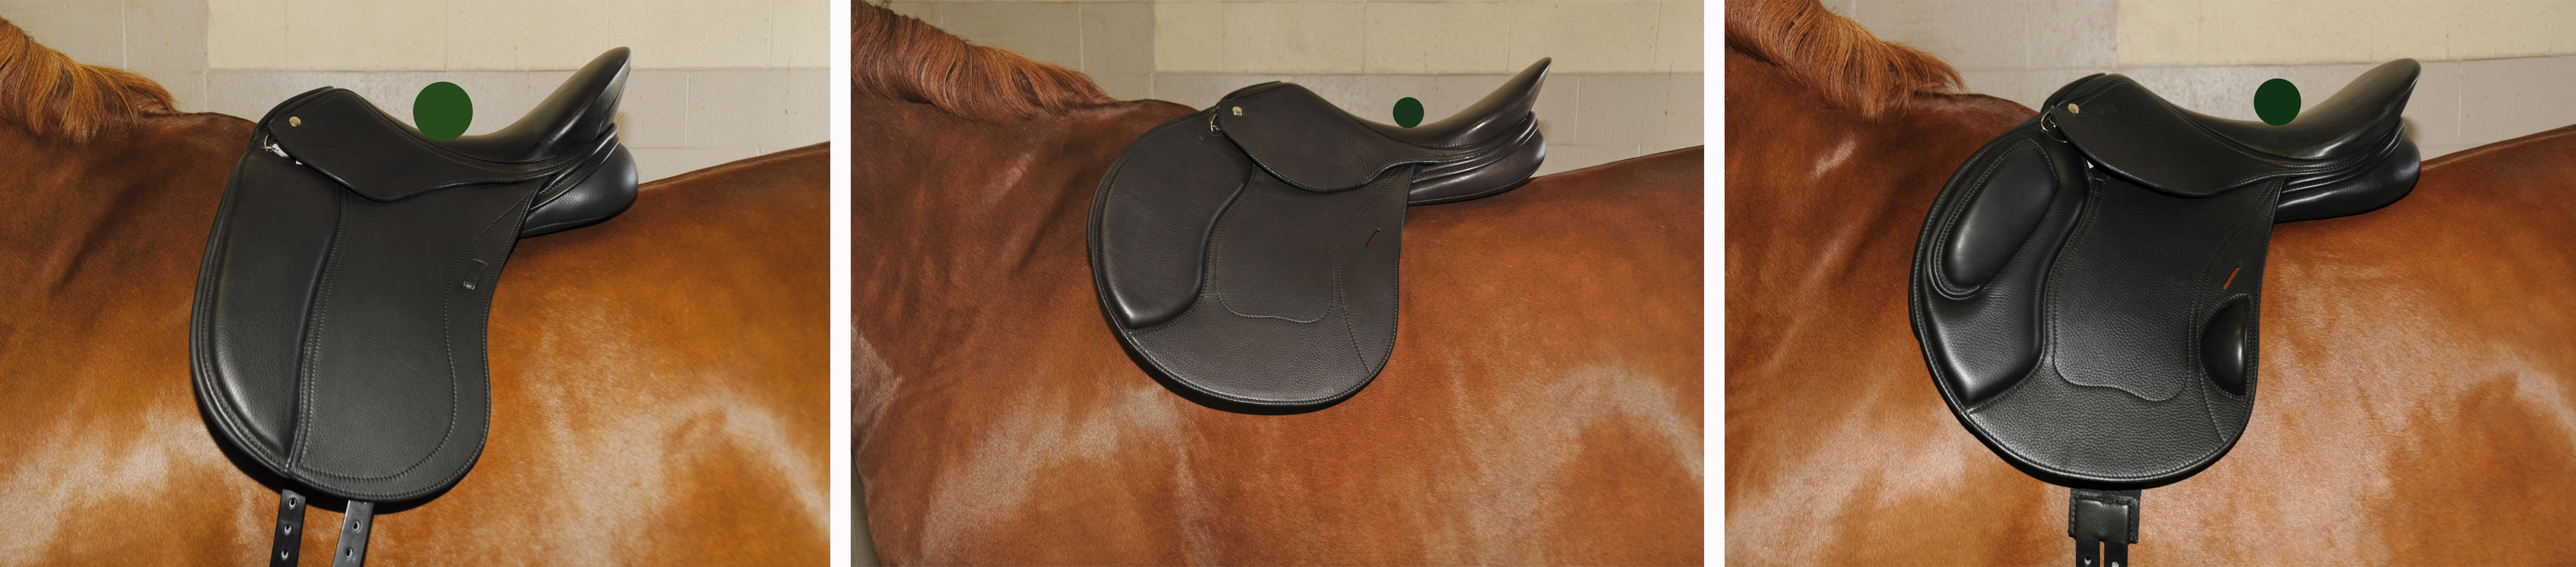 Left: Dressage saddle with center of balance slightly more forward. Center: Jumping saddle with center of balance more to the rear. Right: Eventing saddle for cross-country with balance point more to the rear.